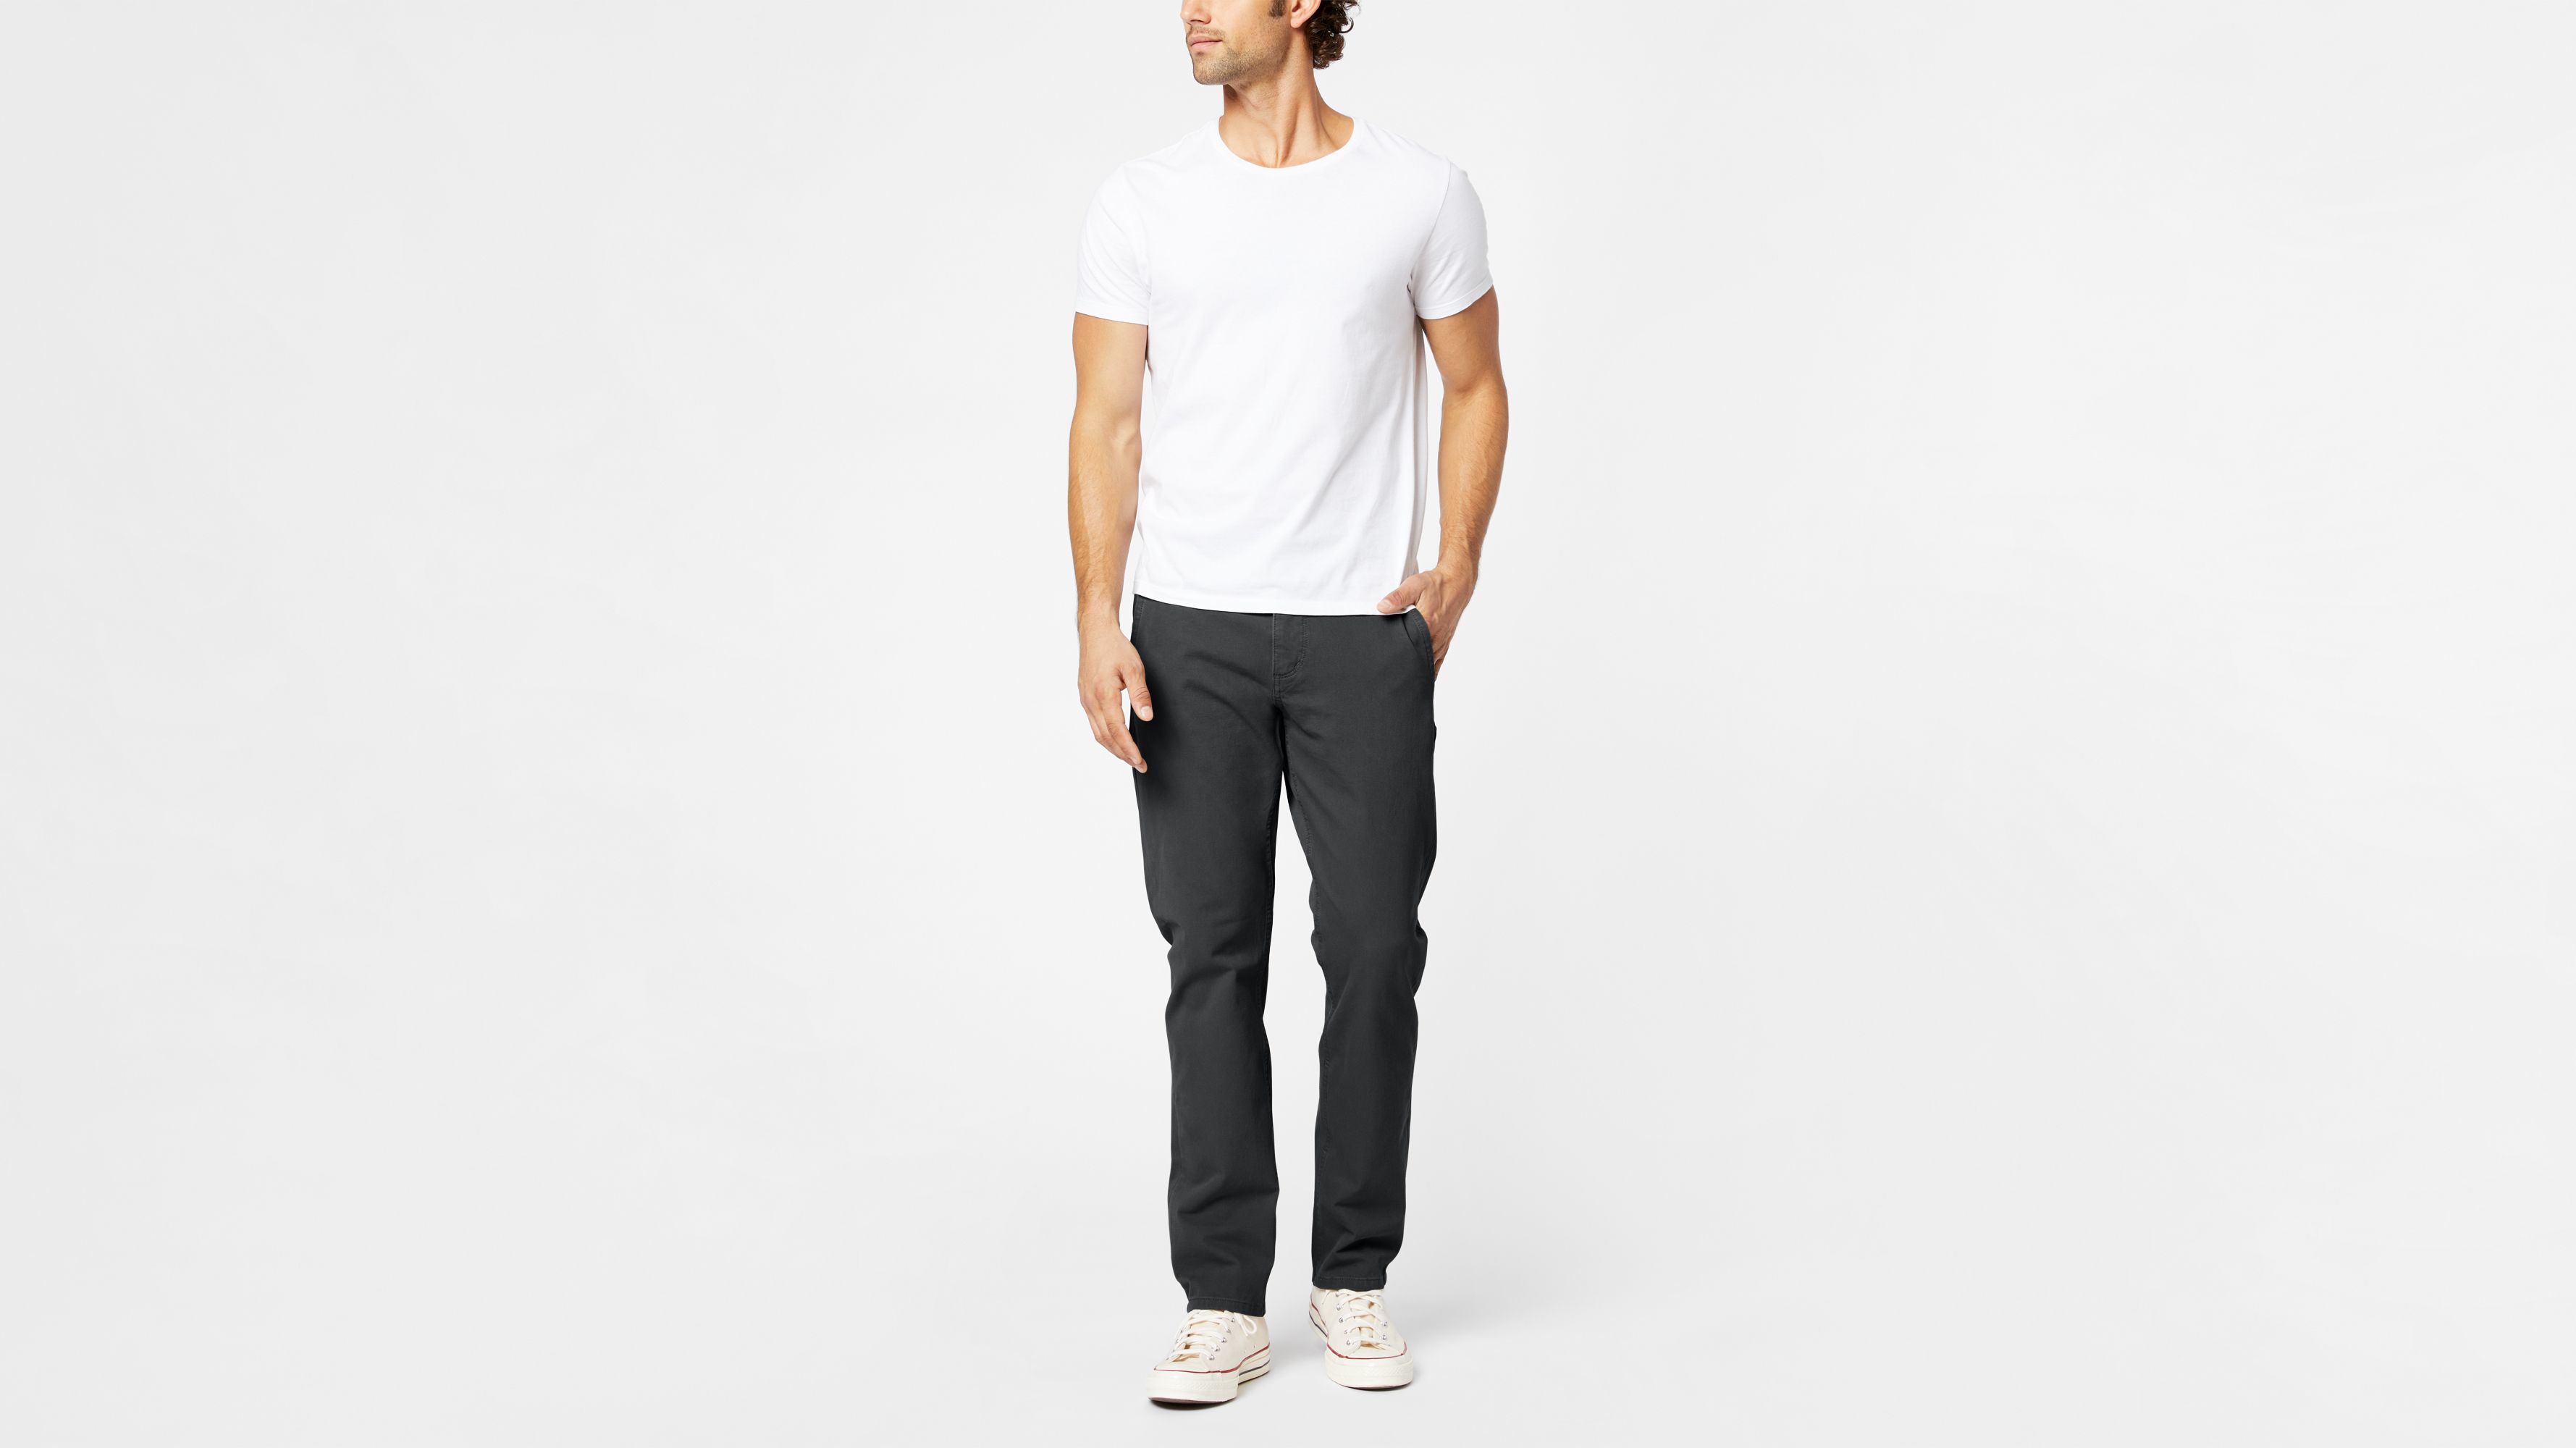 Men's Clothing - Classic, Casual Clothes for Men | Dockers® US